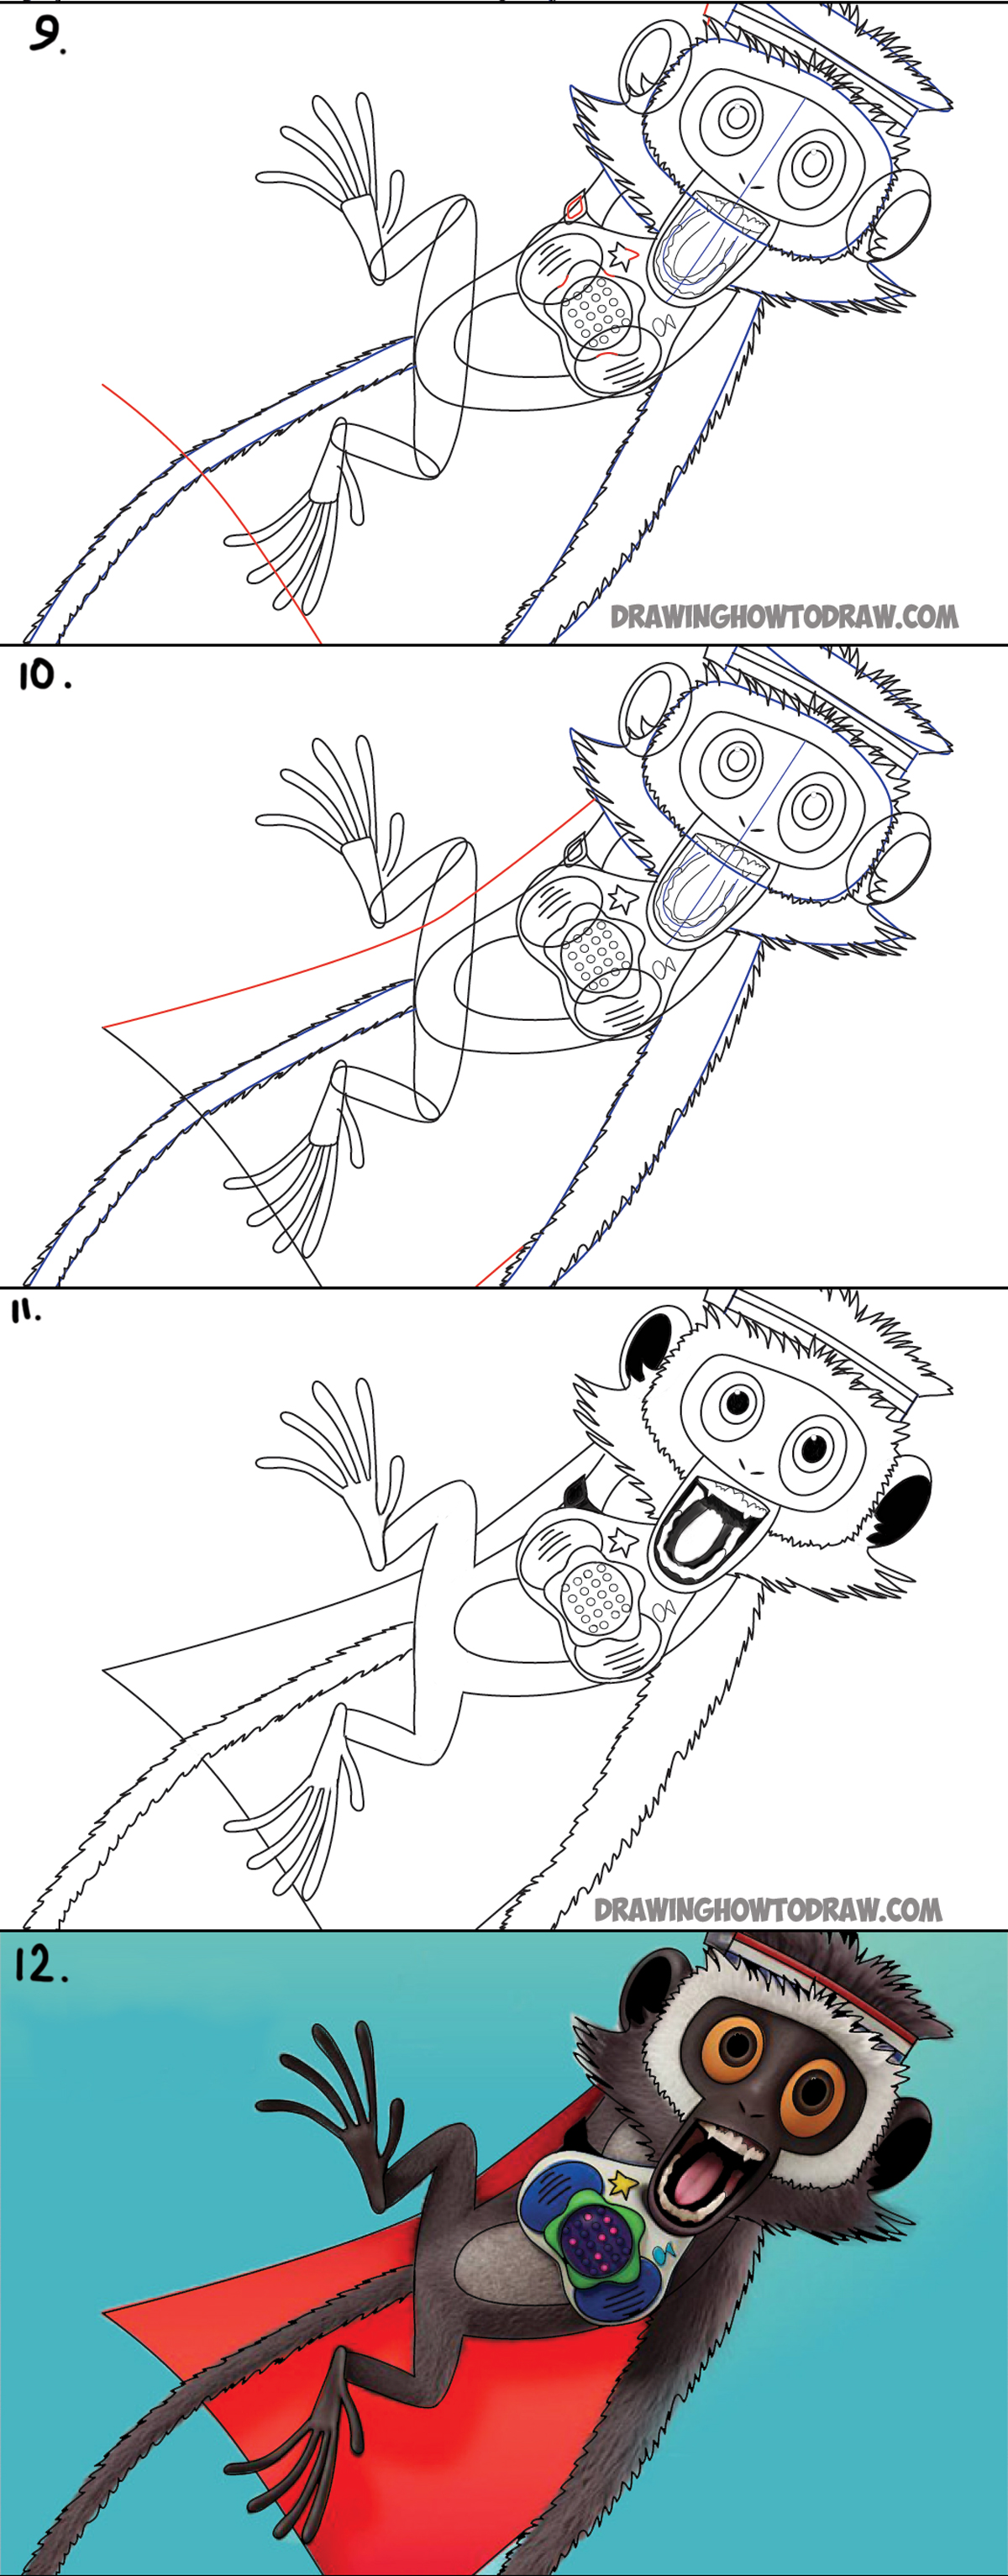 how to draw steve the monkey from cloudy with a chance of meatballs drawing tutorial